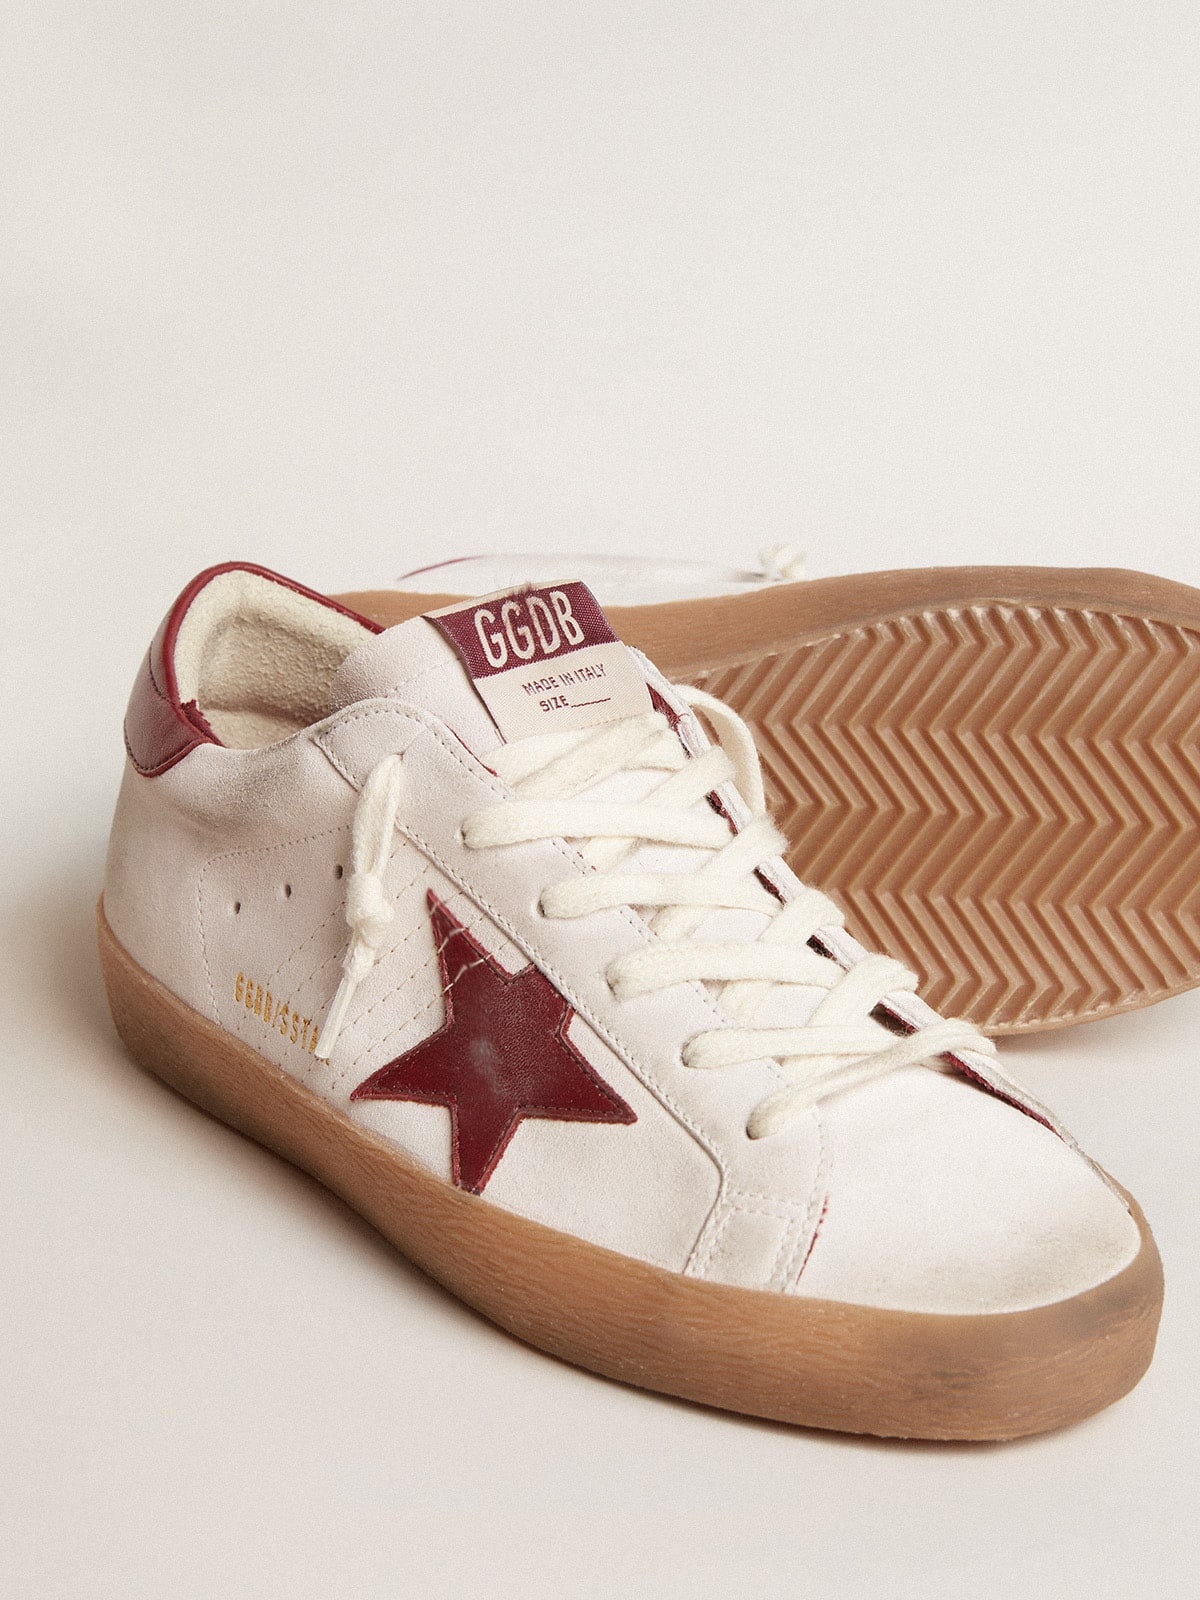 Super-Star in white suede with burgundy leather star and heel tab - 3